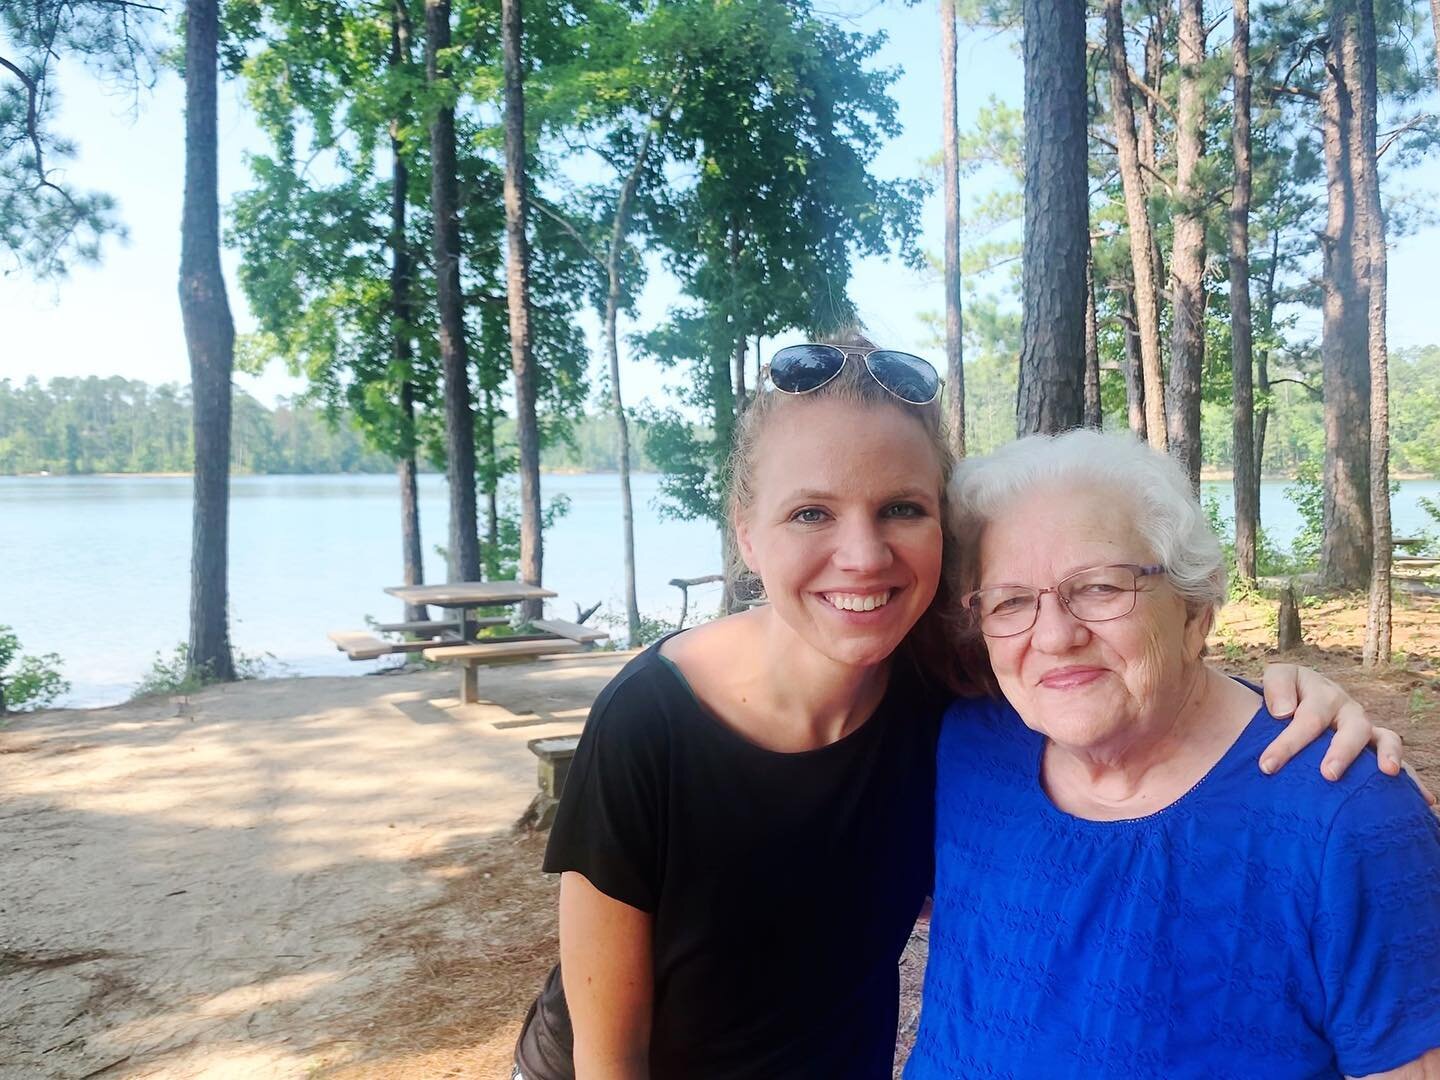 If you know my grandma, you know she&rsquo;s loyal, kind, and generous. You know she loves the Lord and puts others before herself. You know she always has your back and will point you to what&rsquo;s true.⁣
⁣
You also know she&rsquo;s spunky, quick-